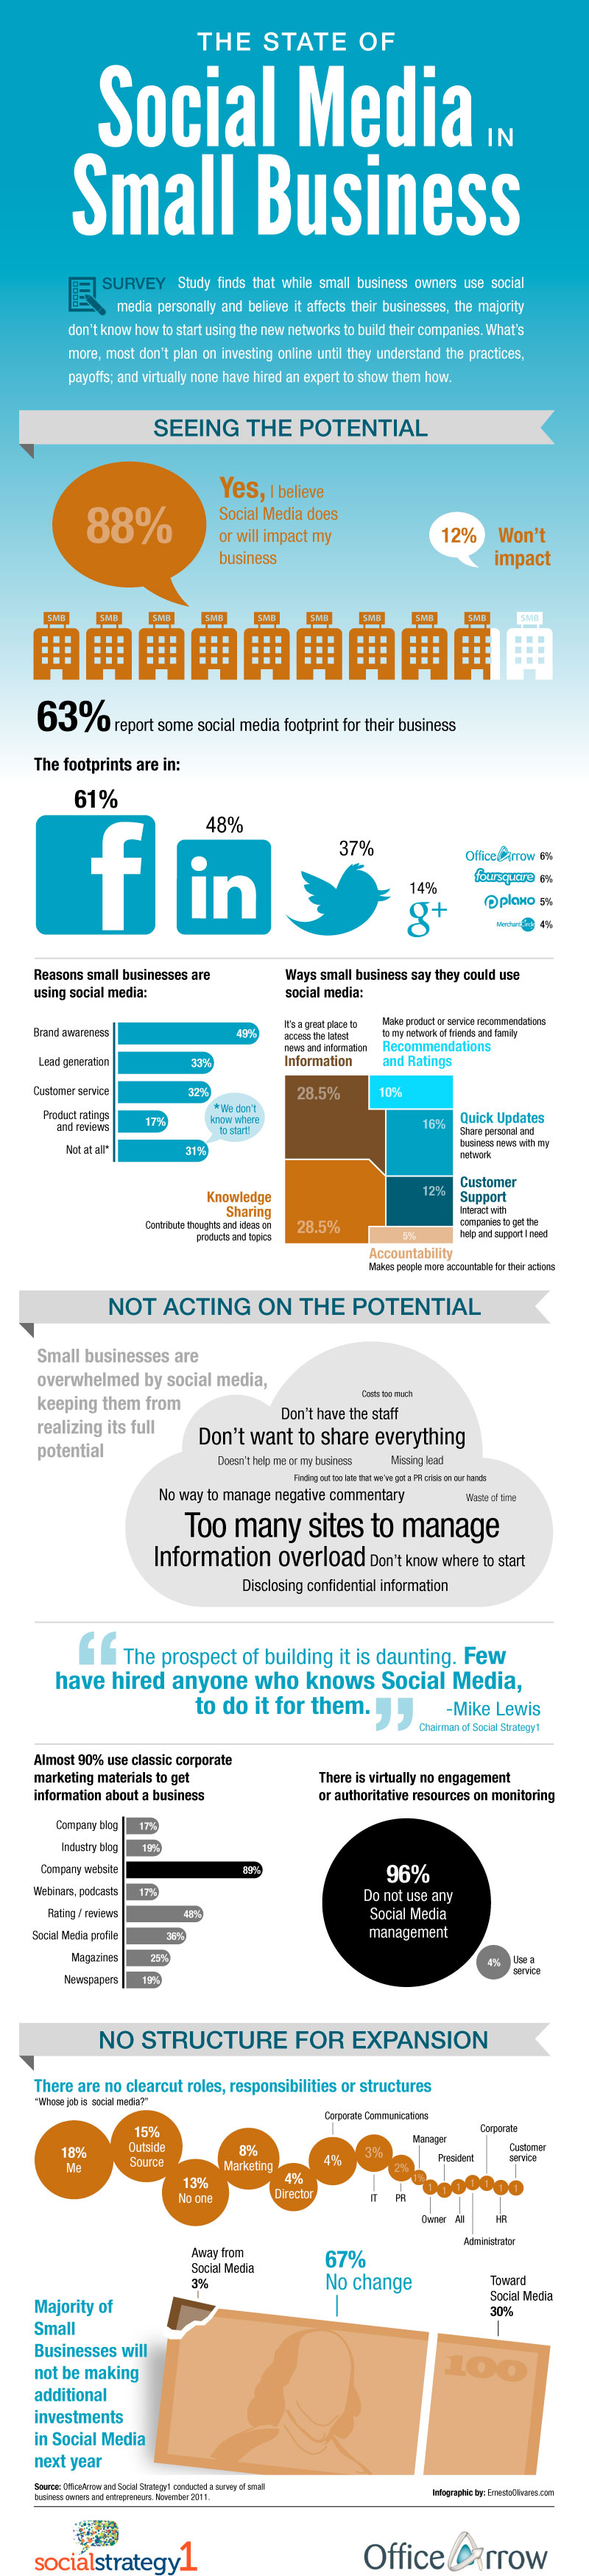 Small-Business-Social-Media-Infographic